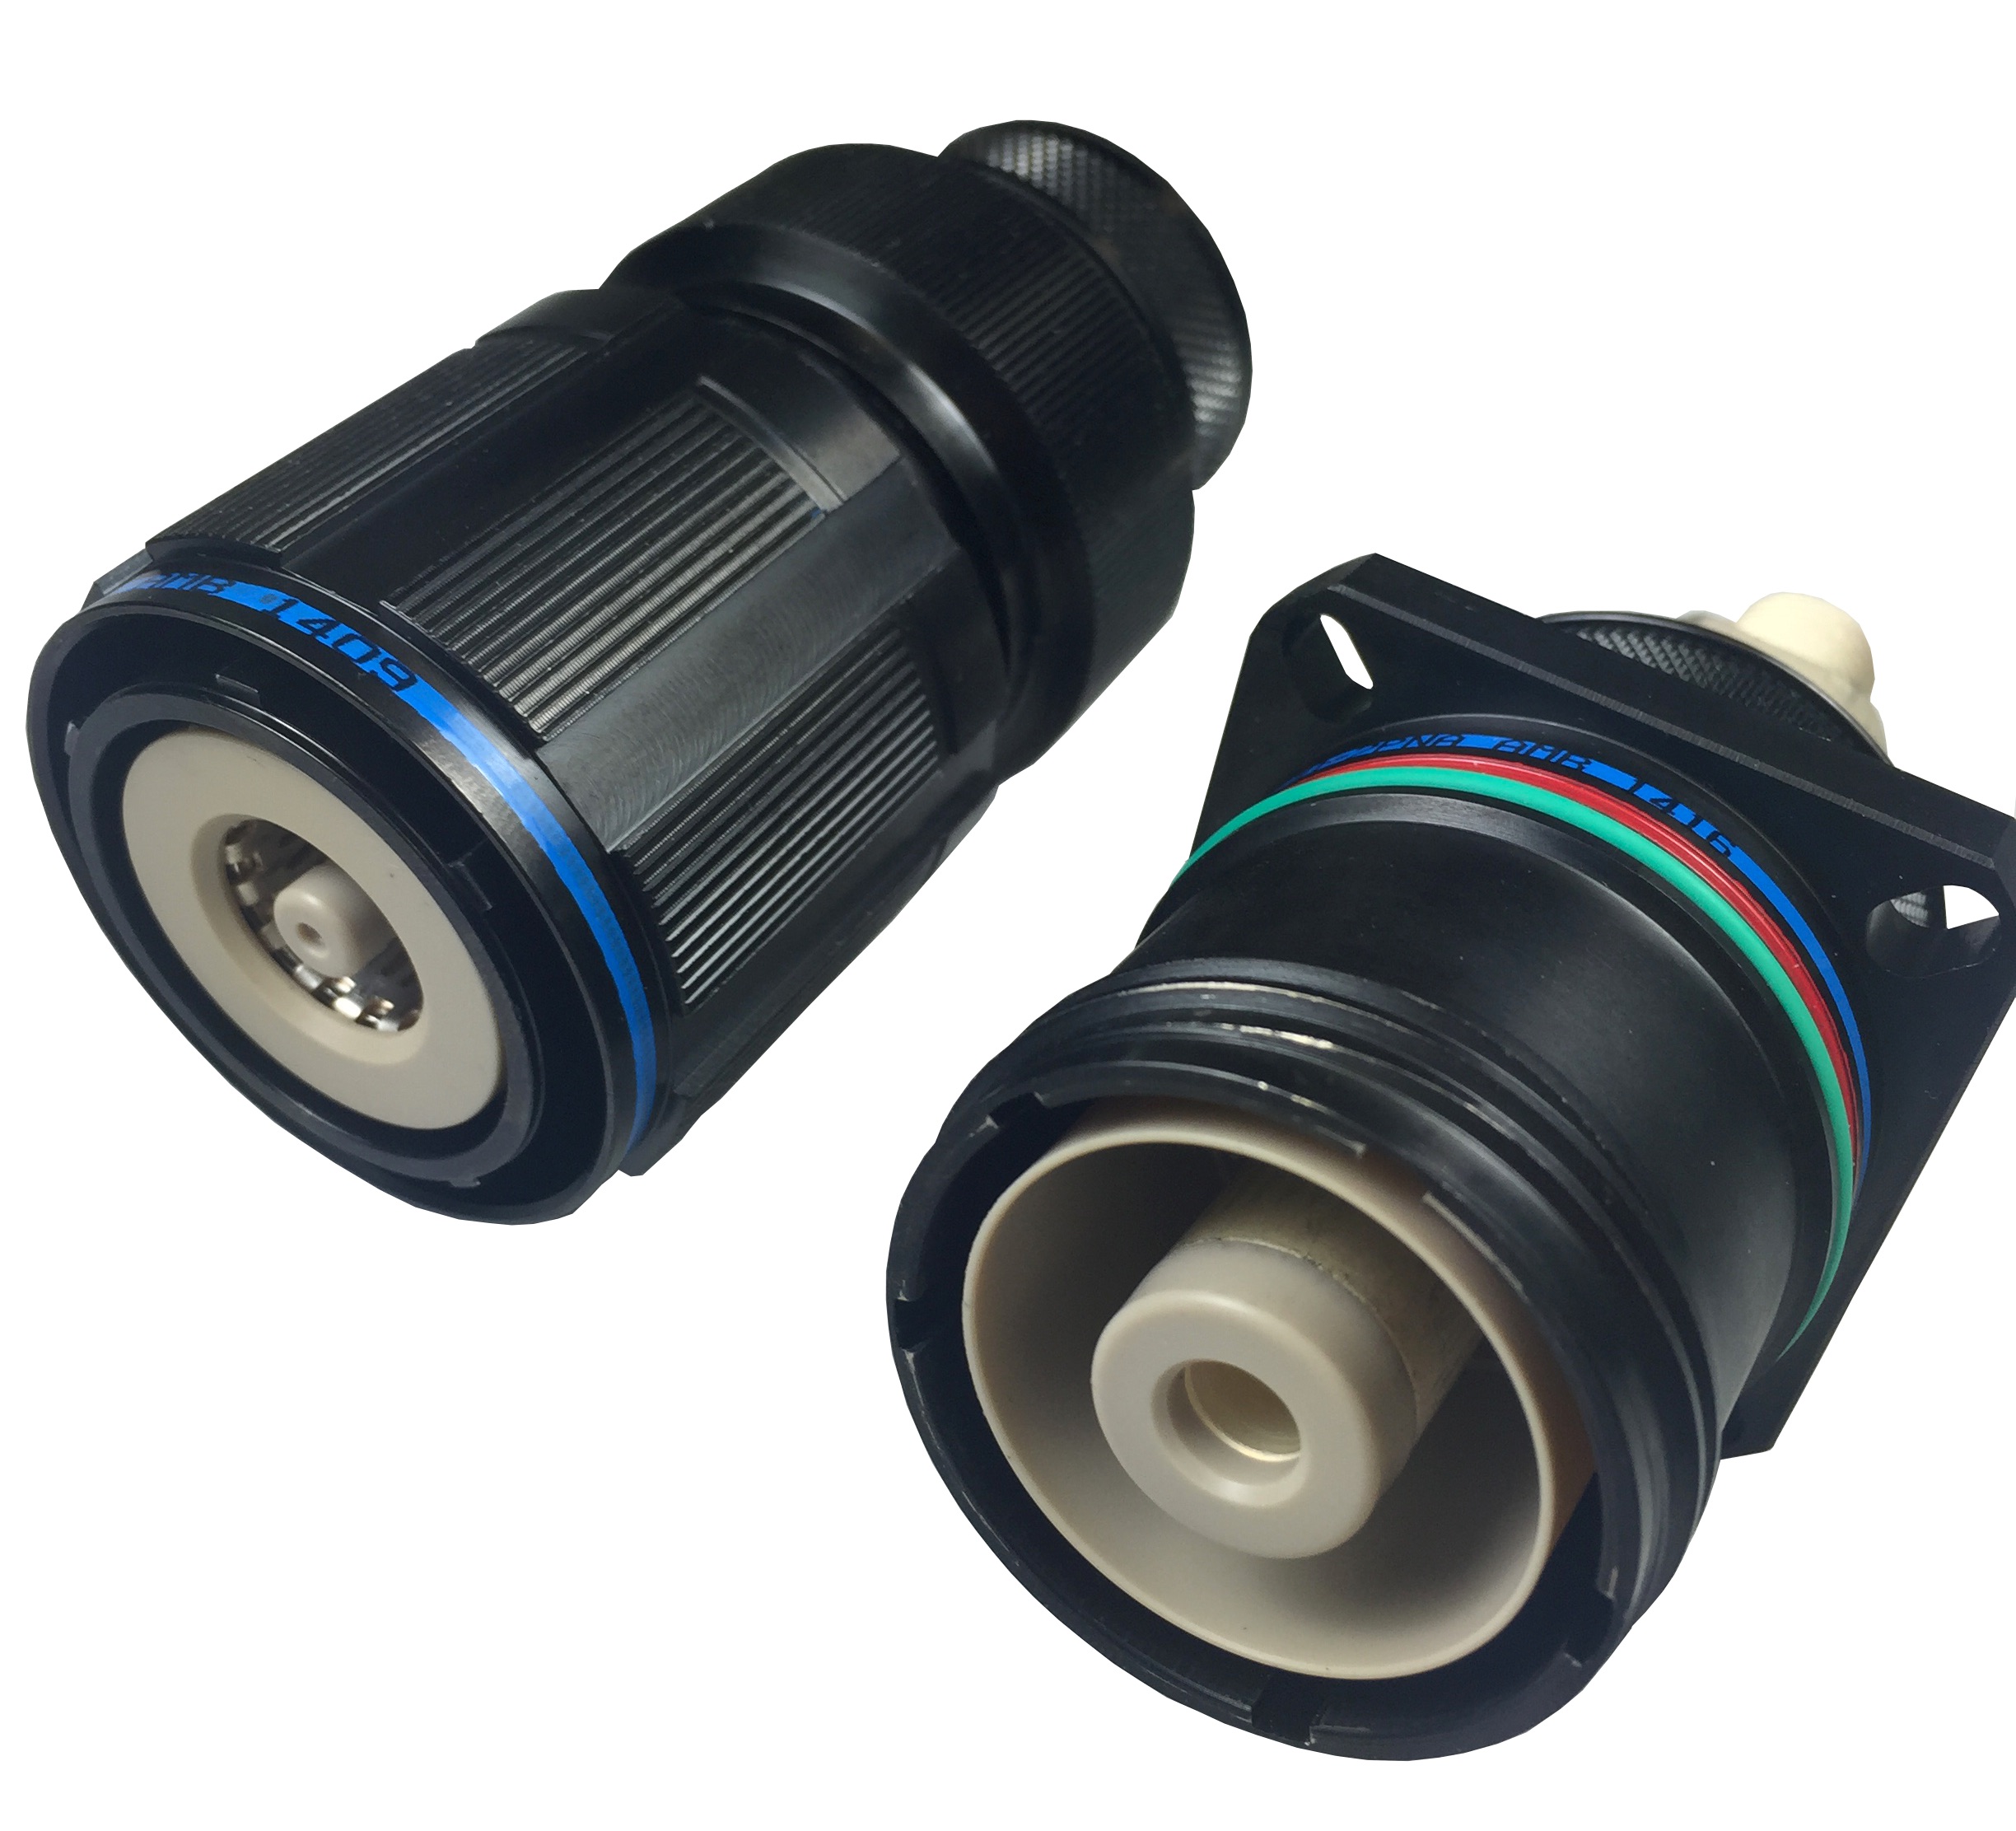 High-Voltage and High-Current Connector Products: Amphenol Pcd's Rhino Series connectors